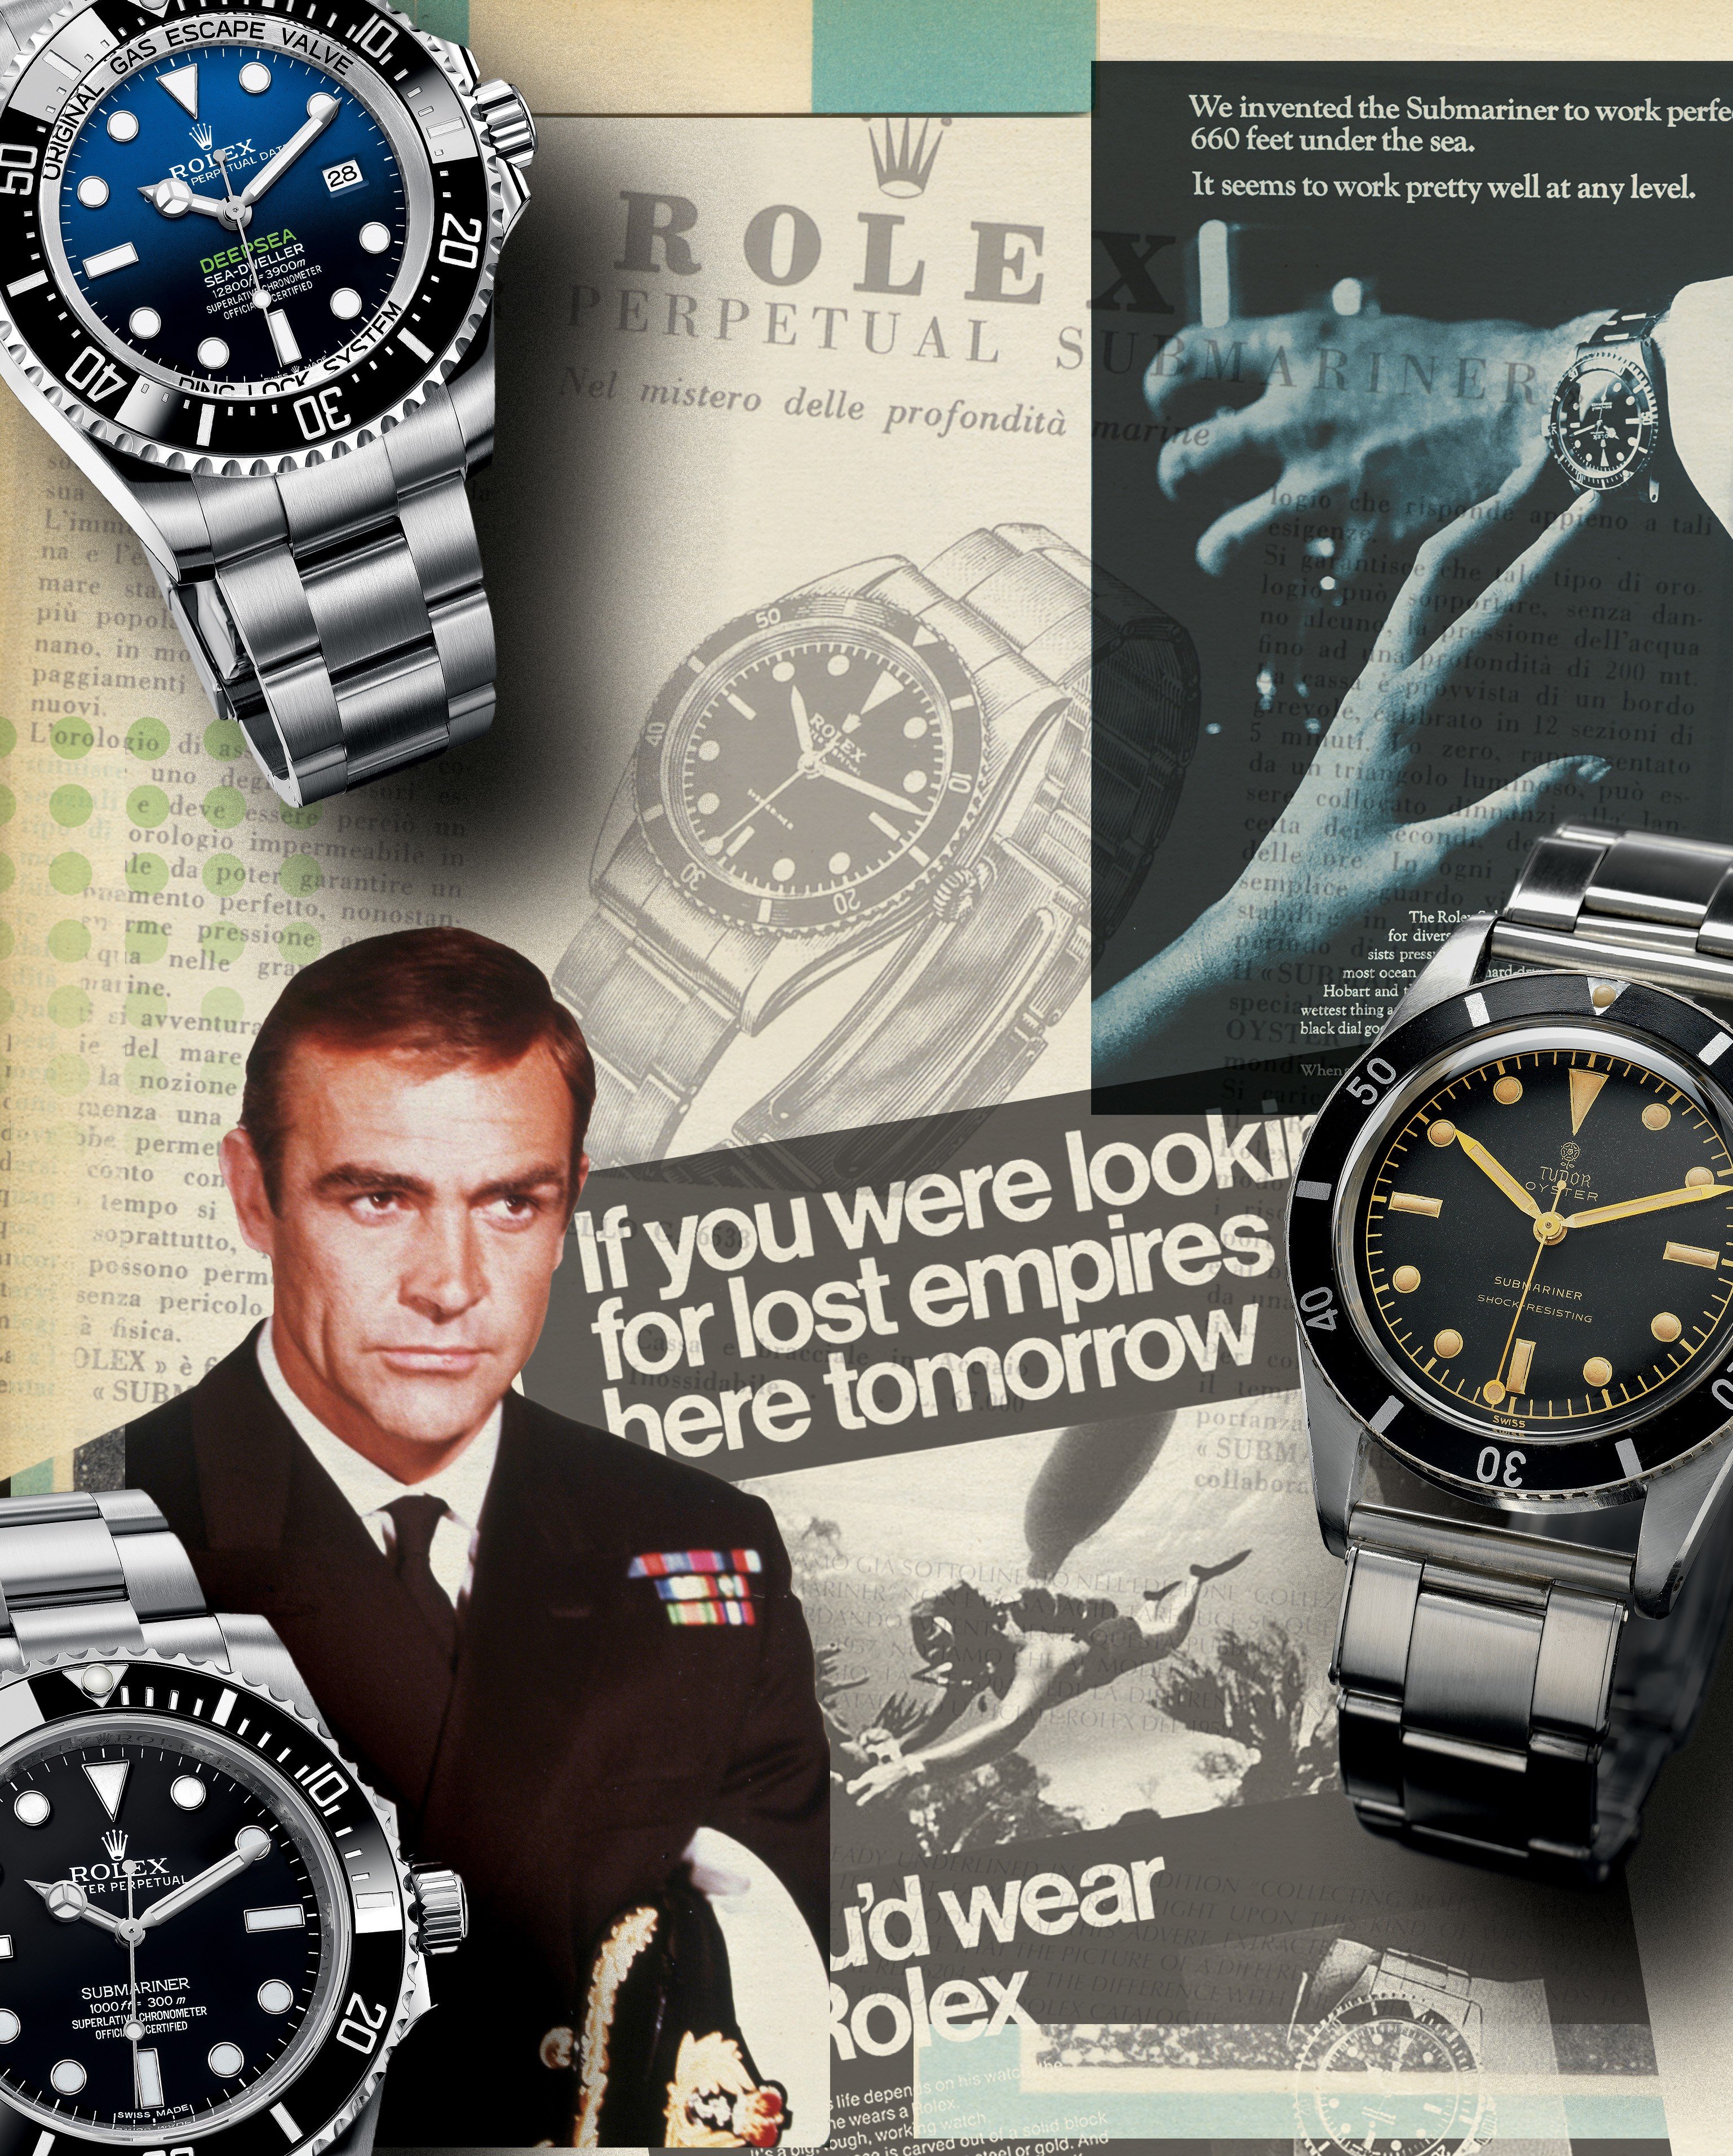 All titles are courtesy Rizzoli International Publications, ©2019 Sea Time by Aaron Sigmond and Mark Bernardo, Rizzoli New York, Collage created for SEA TIME: WATCHES by Lucas Irwin.